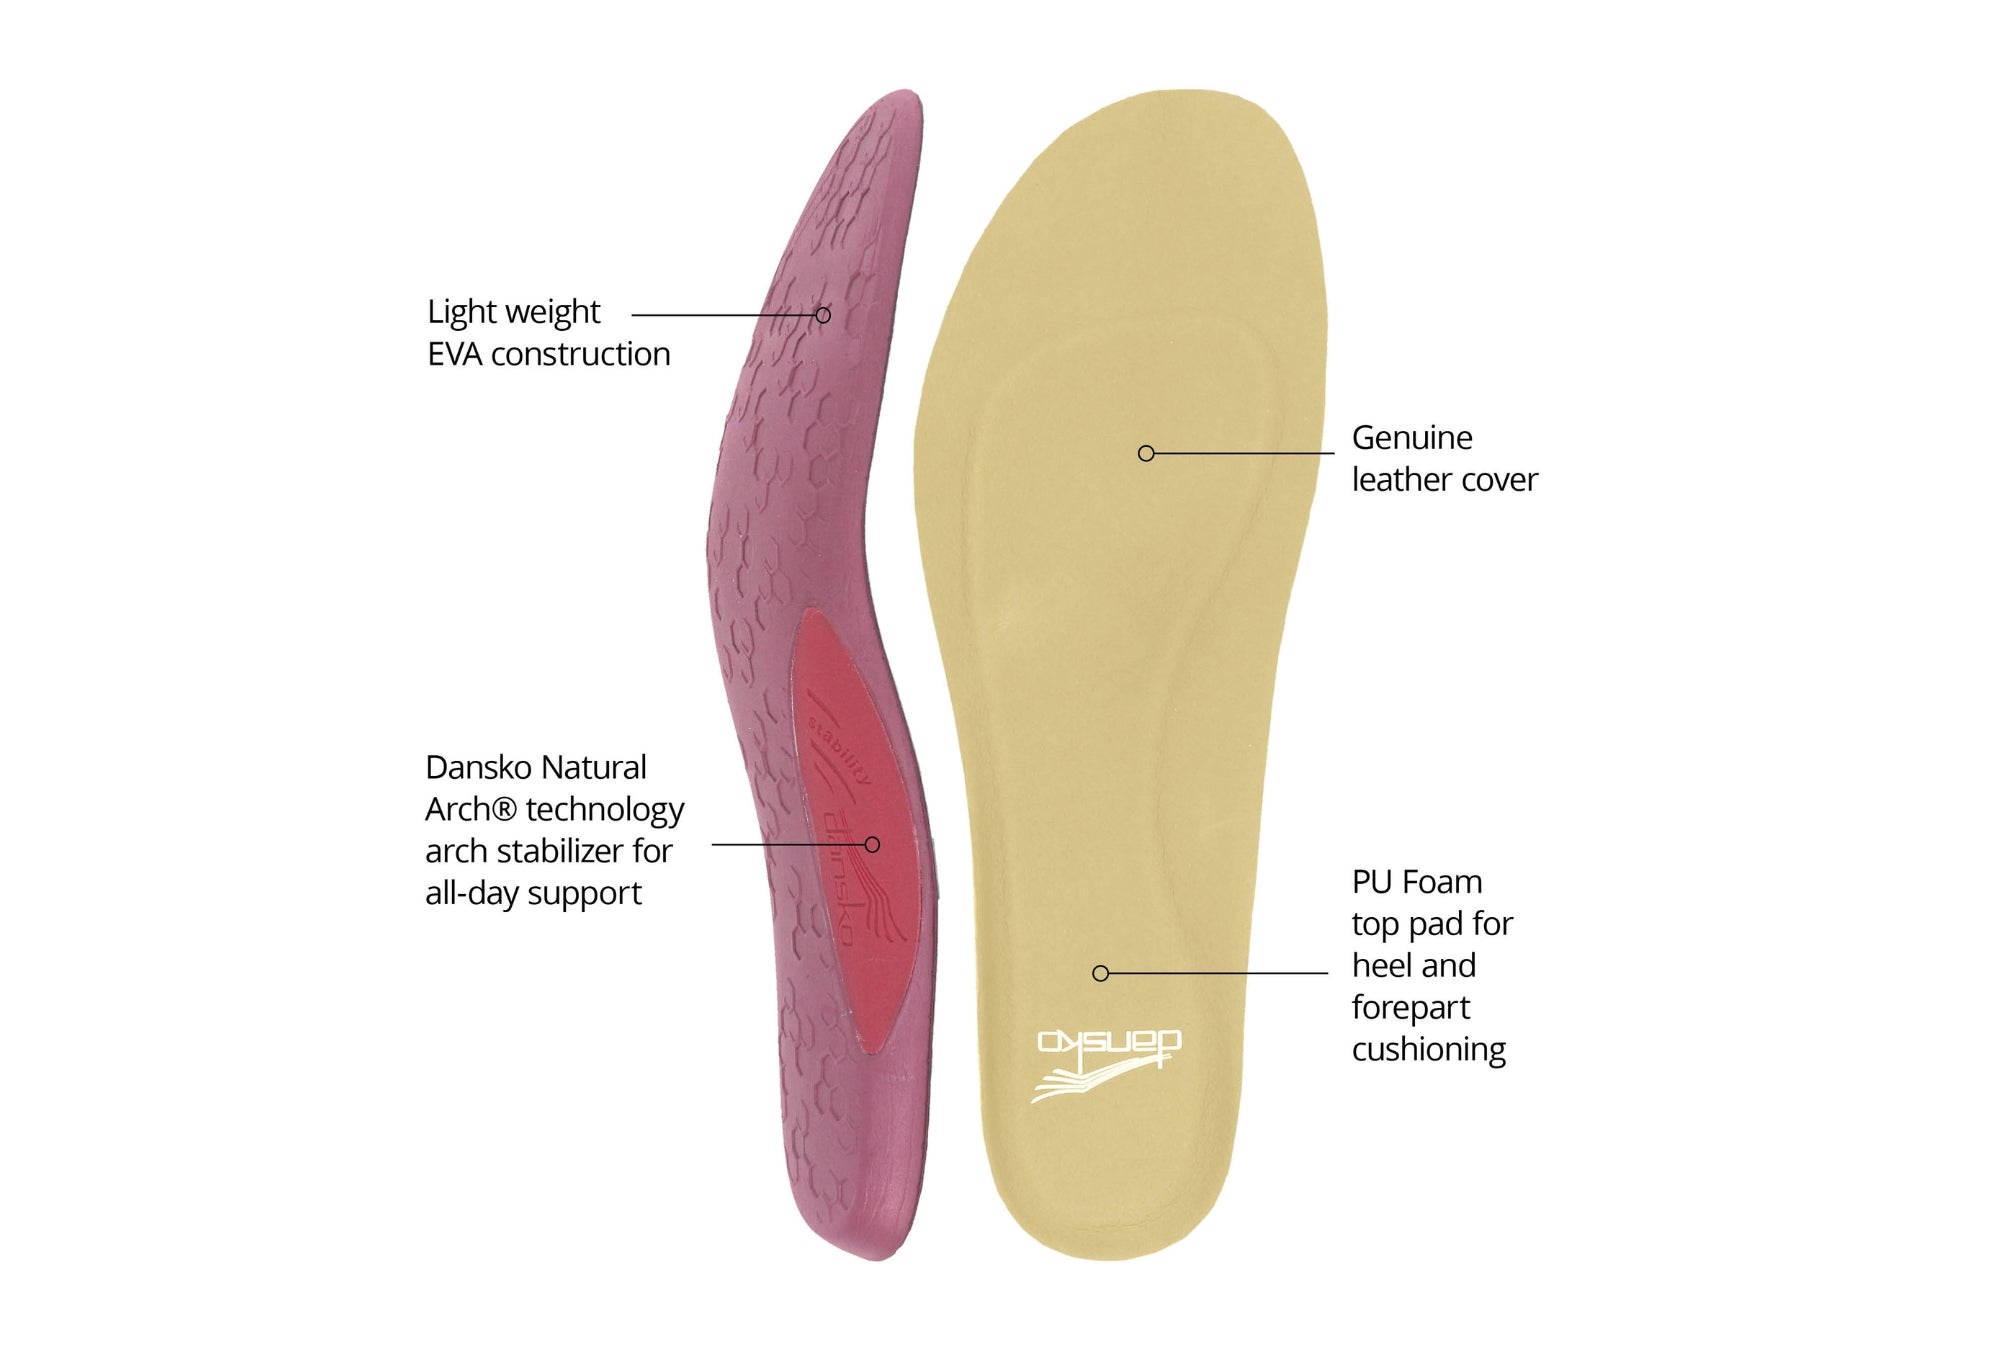 Close up of comfort insoles with 4 feature callouts reading: Light weight EVA construction; Dansko Natural Arch technology for all day support; Genuine leather cover; PU Foam top pad for heel and forepart cushioning.